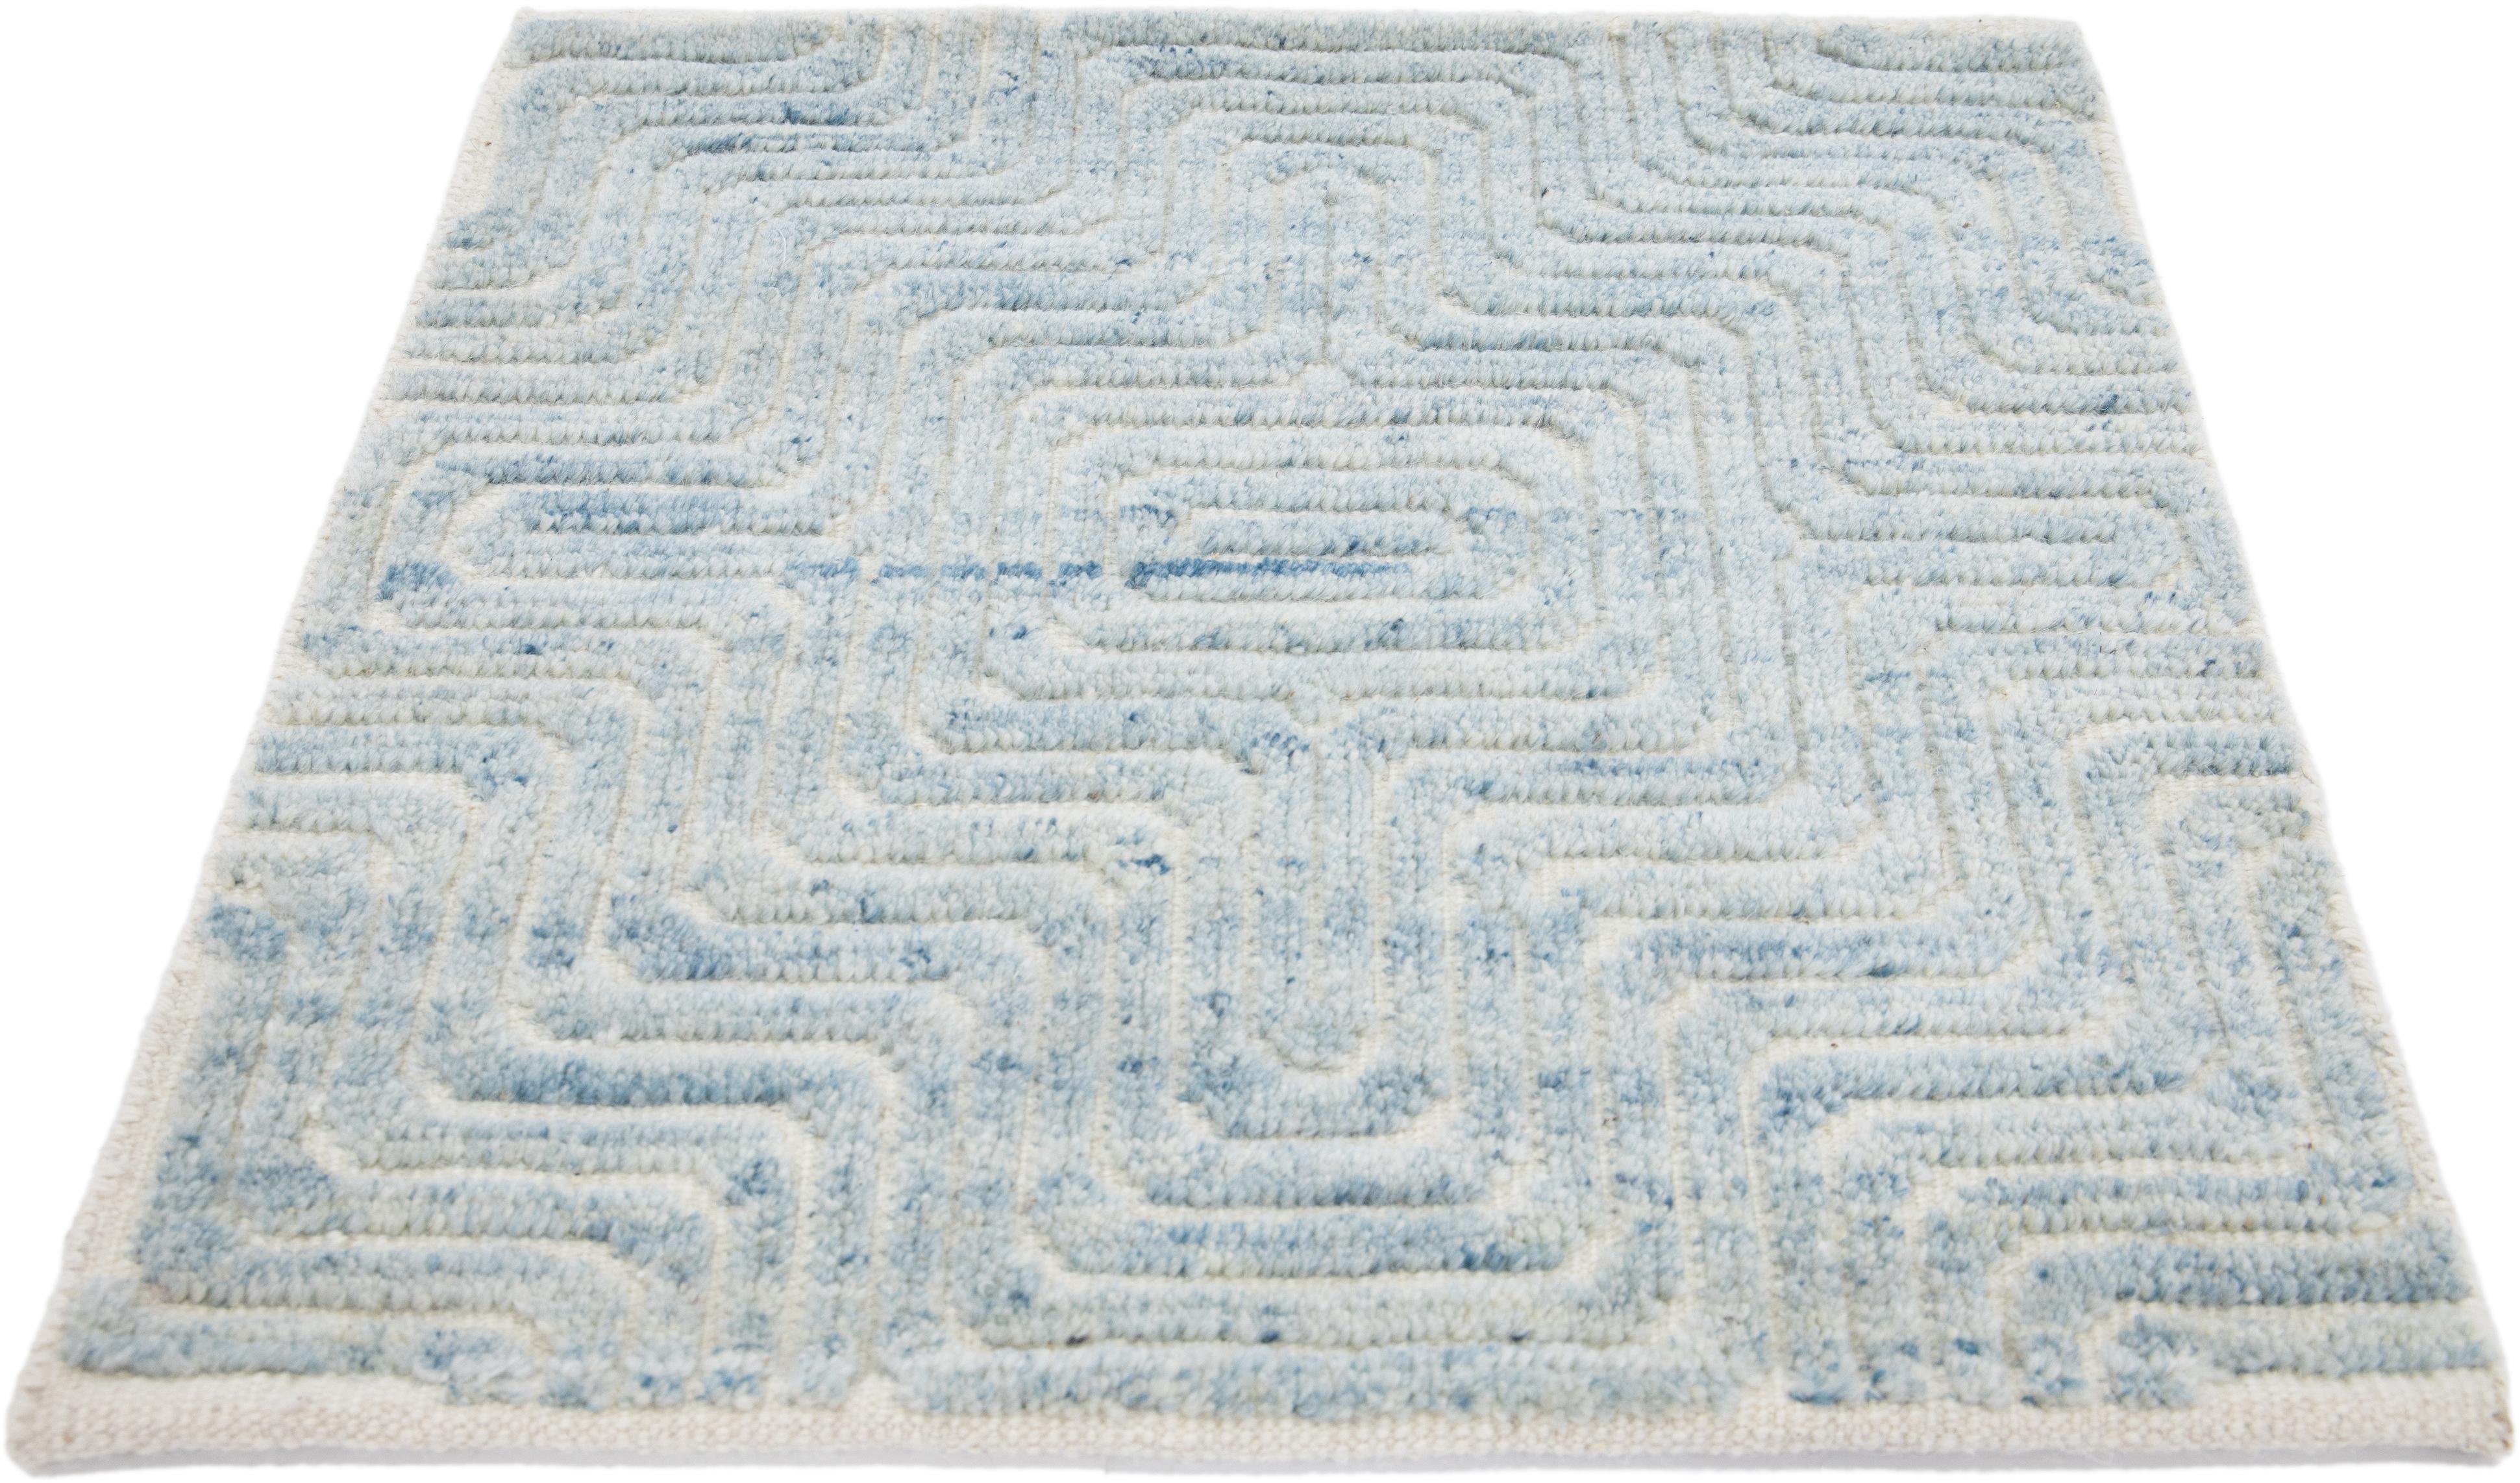 Apadana's Modern Moroccan Style new Zealand wool custom rug. Custom sizes and colors made-to-order. 

Material: New Zealand wool 
Techniques: Hand-knotted
Style: Moroccan 
Lead time: Approx. 15-16 wks available 
Colors: As shown, other custom